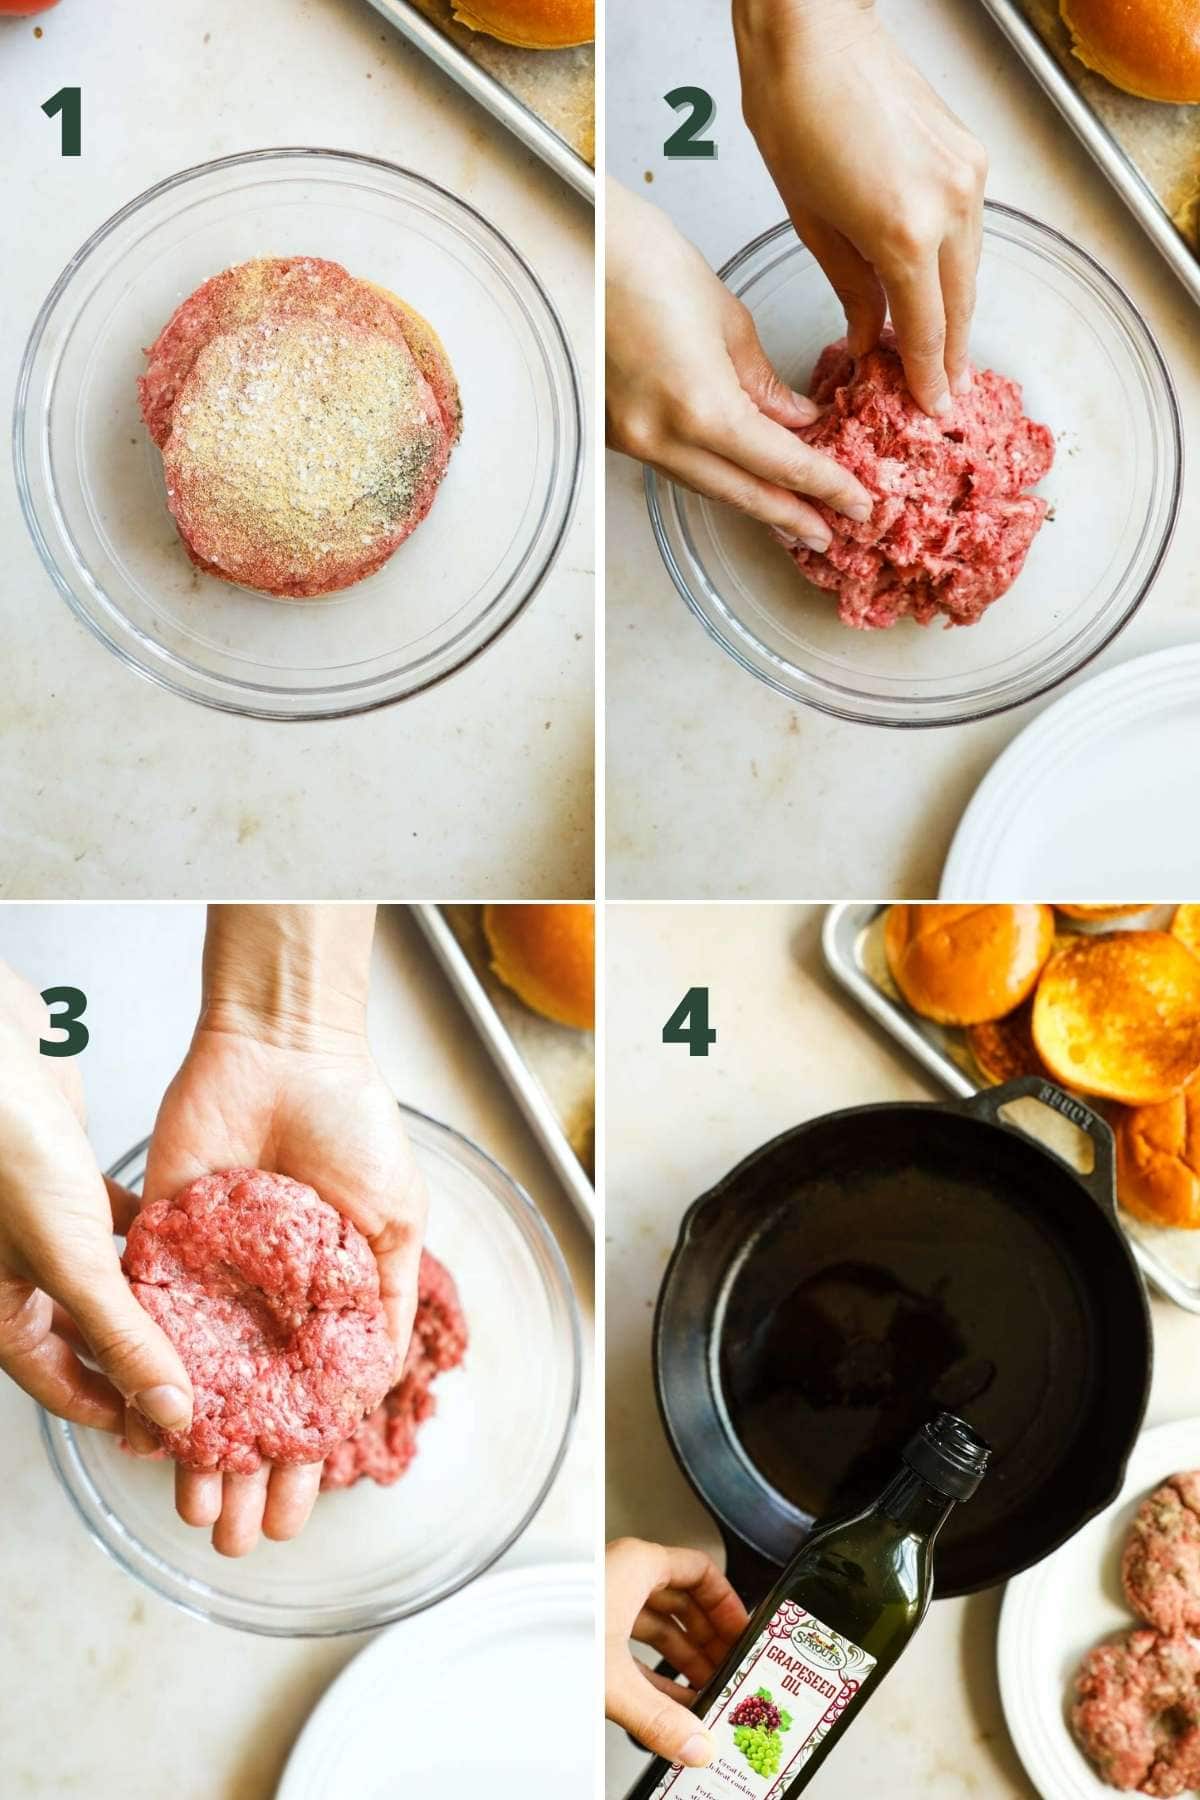 Steps to make cast iron skillet burgers, including mixing the meat in a bowl with seasoning, forming the patties, and heating the skillet.